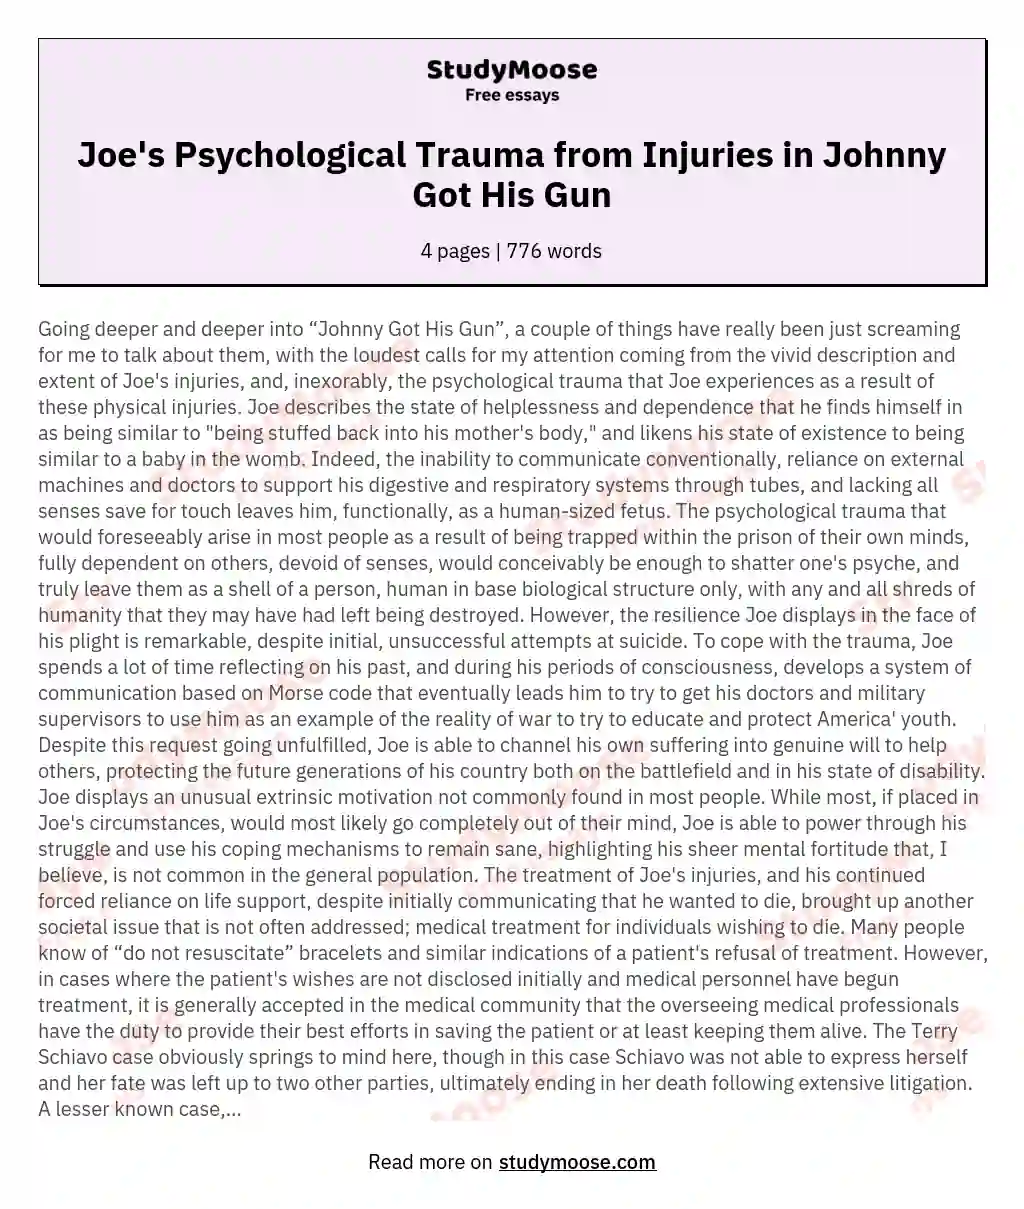 Exploring Trauma, Resilience, and Ethical Dilemmas in "Johnny Got His Gun" essay